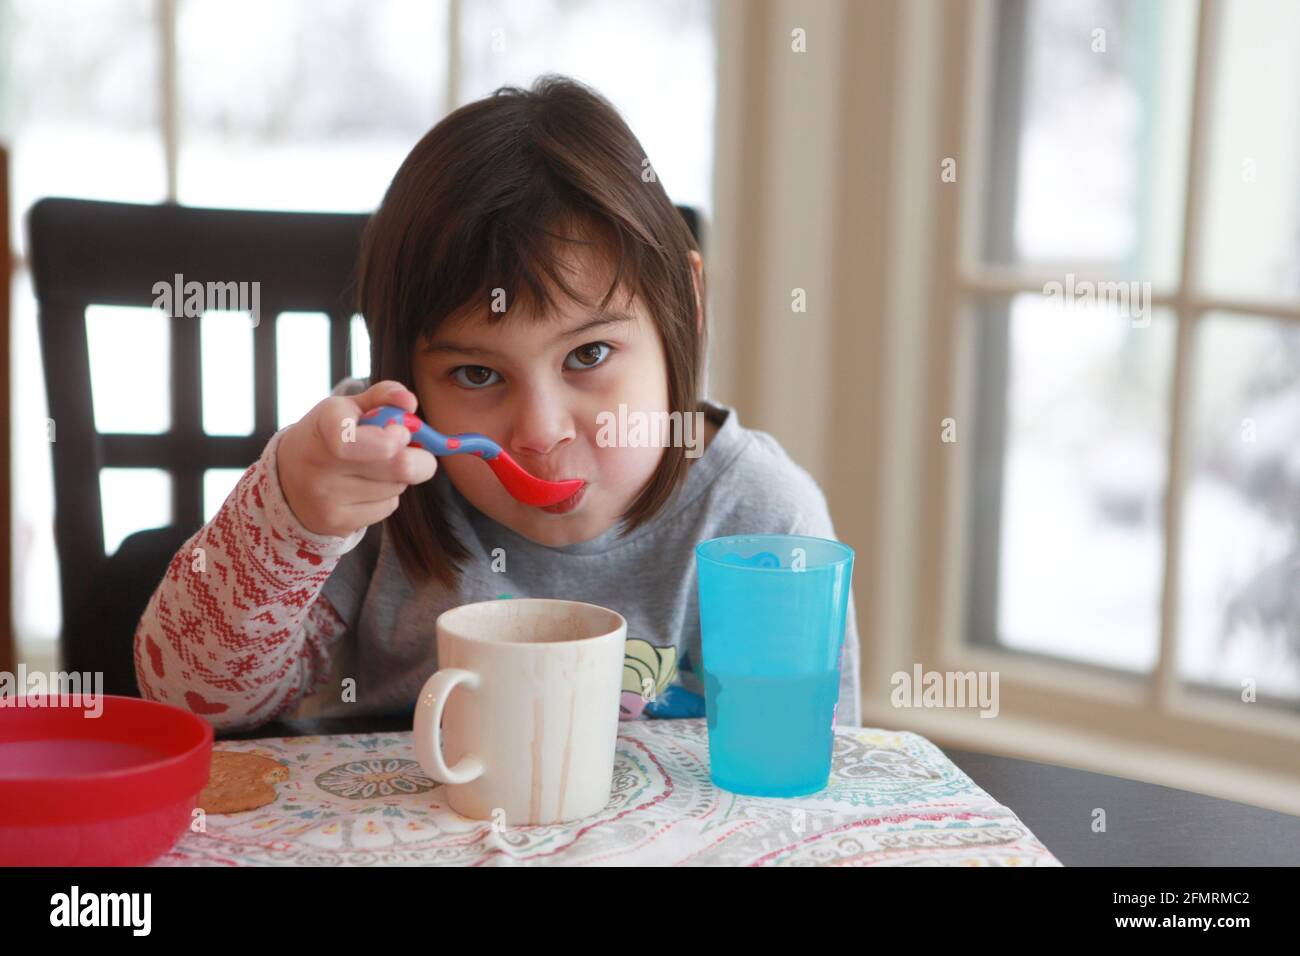 Little girl enjoying some hot chocolate in her kitchen on a snowy day. Stock Photo